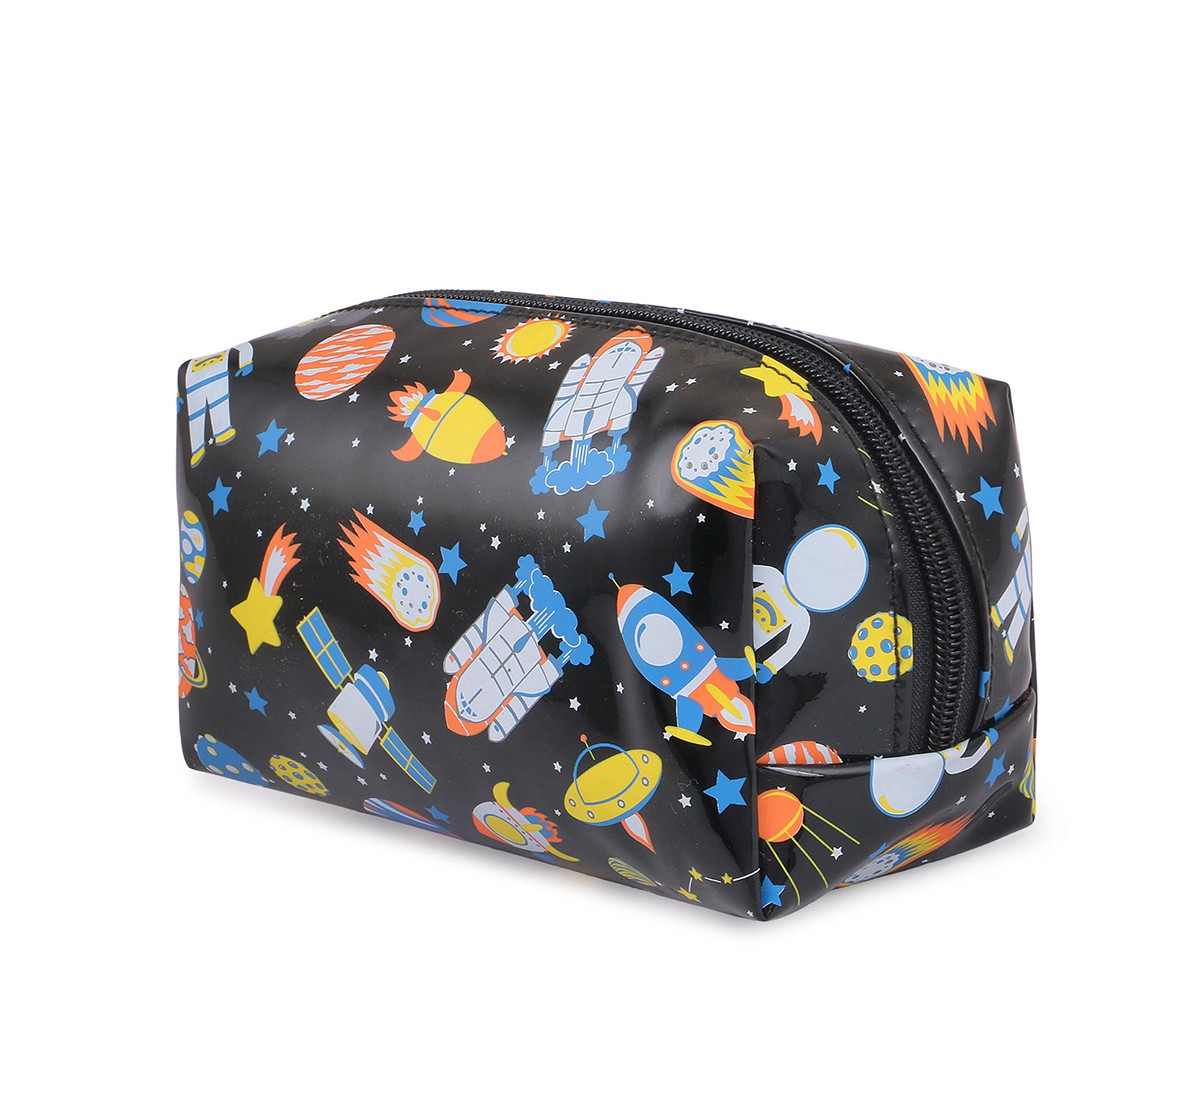 Hamster London Rectangular Space Pouch for Kids age 3Y+ (Black)